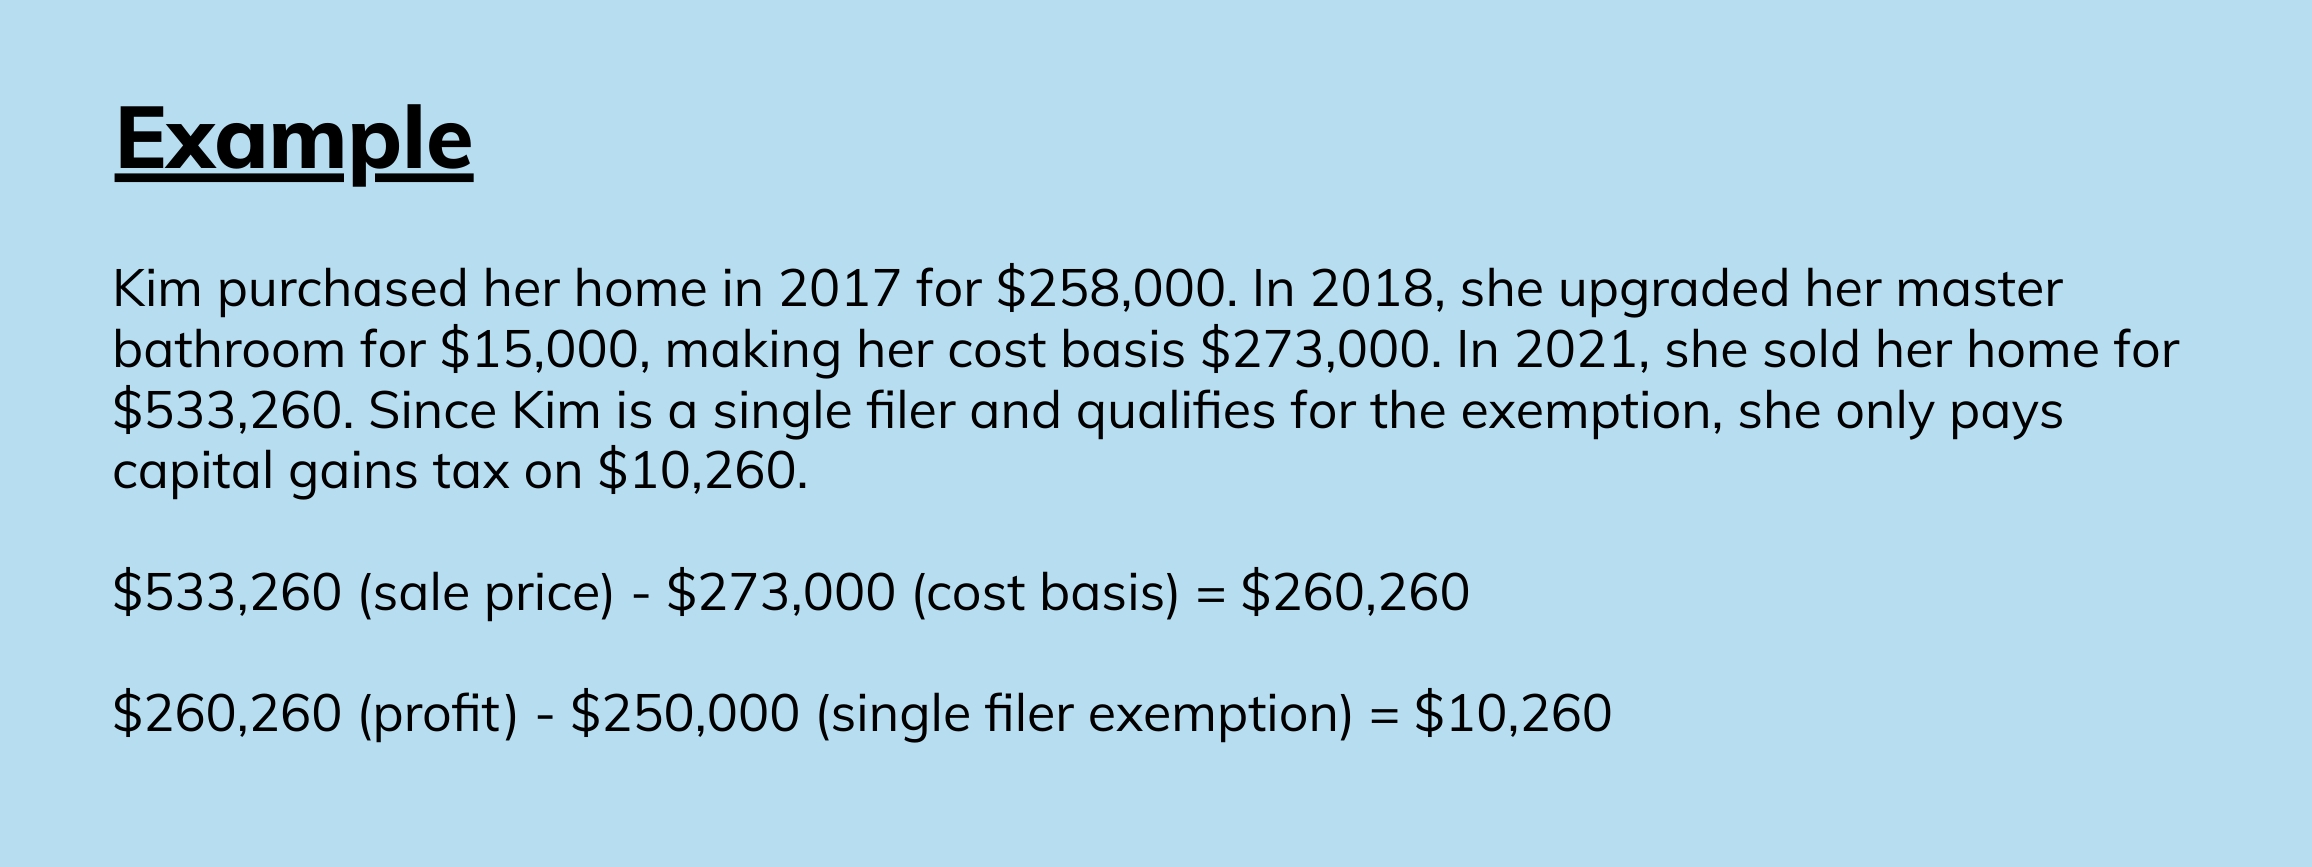 capital gains tax and cost basis example
